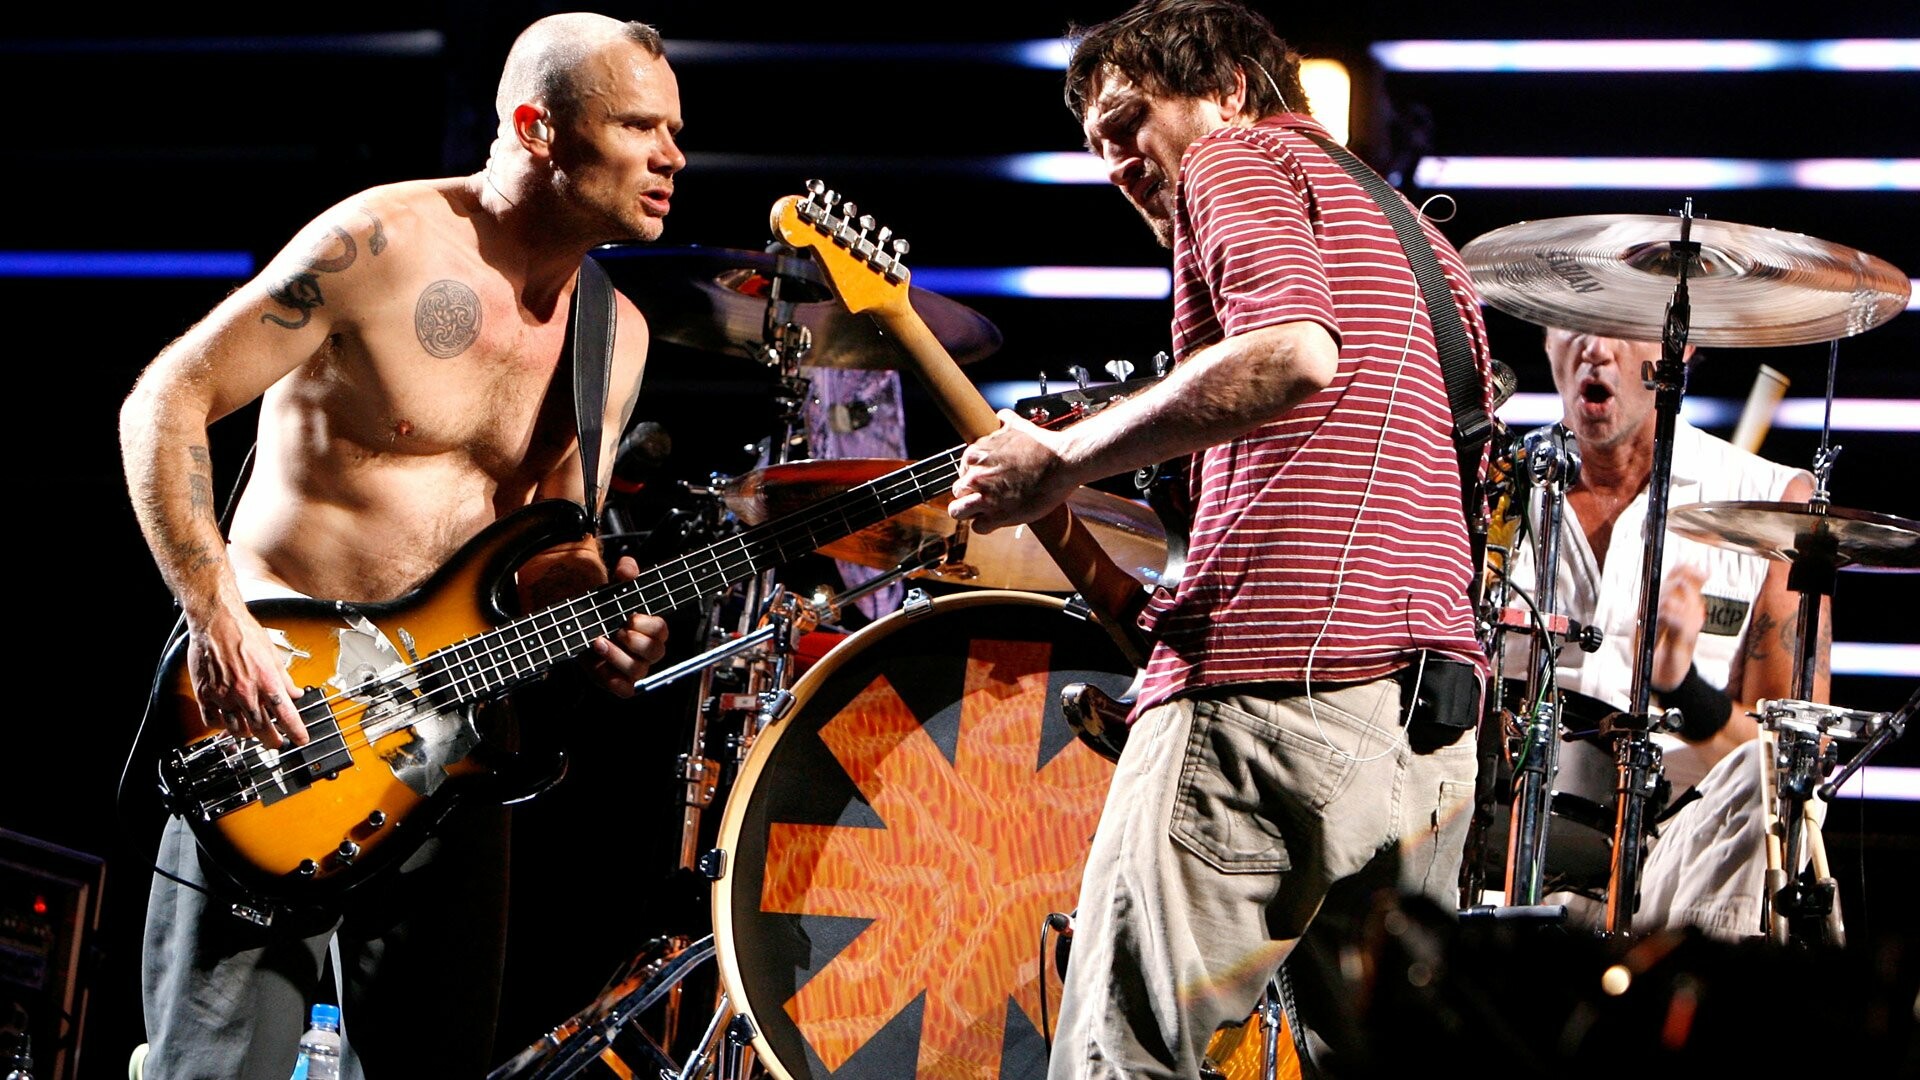 Red Hot Chilli Peppers: RHCP, Funk, Rock, Alternative, Musicians. 1920x1080 Full HD Background.